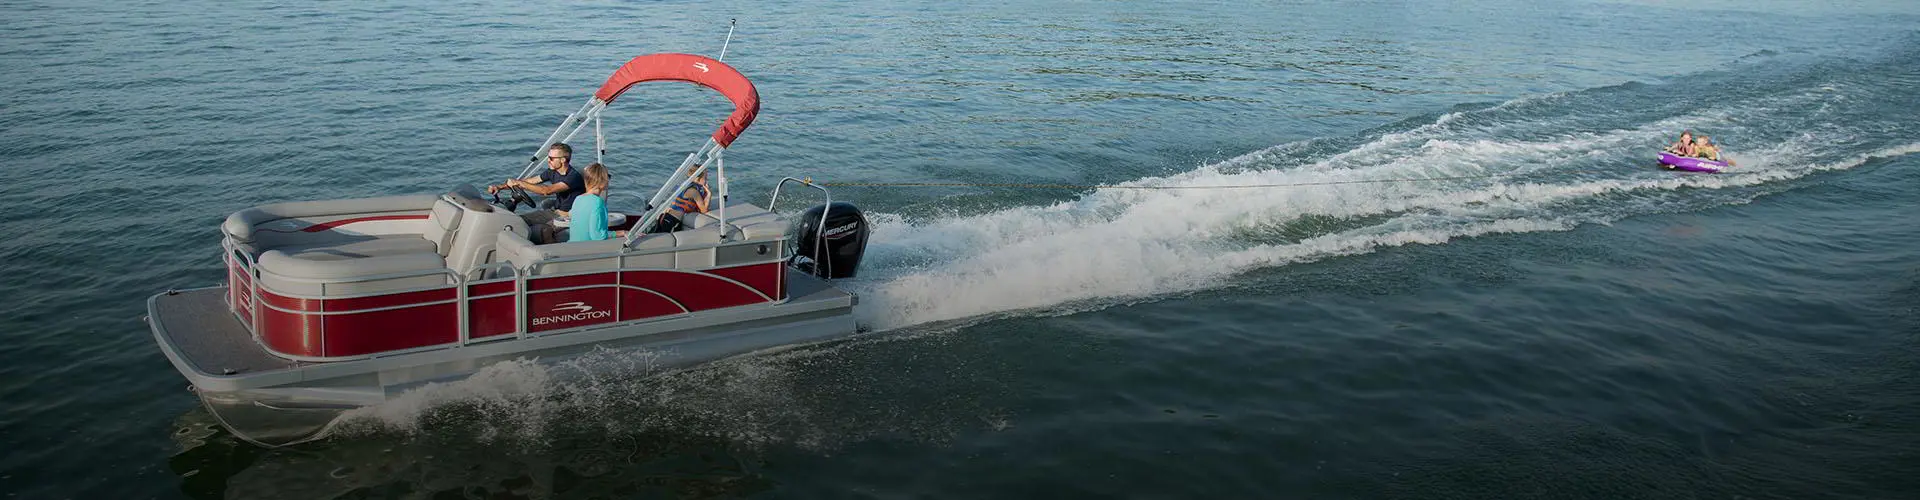 The Cooler You Need for Your Boat, by Ben's Marine Yamba